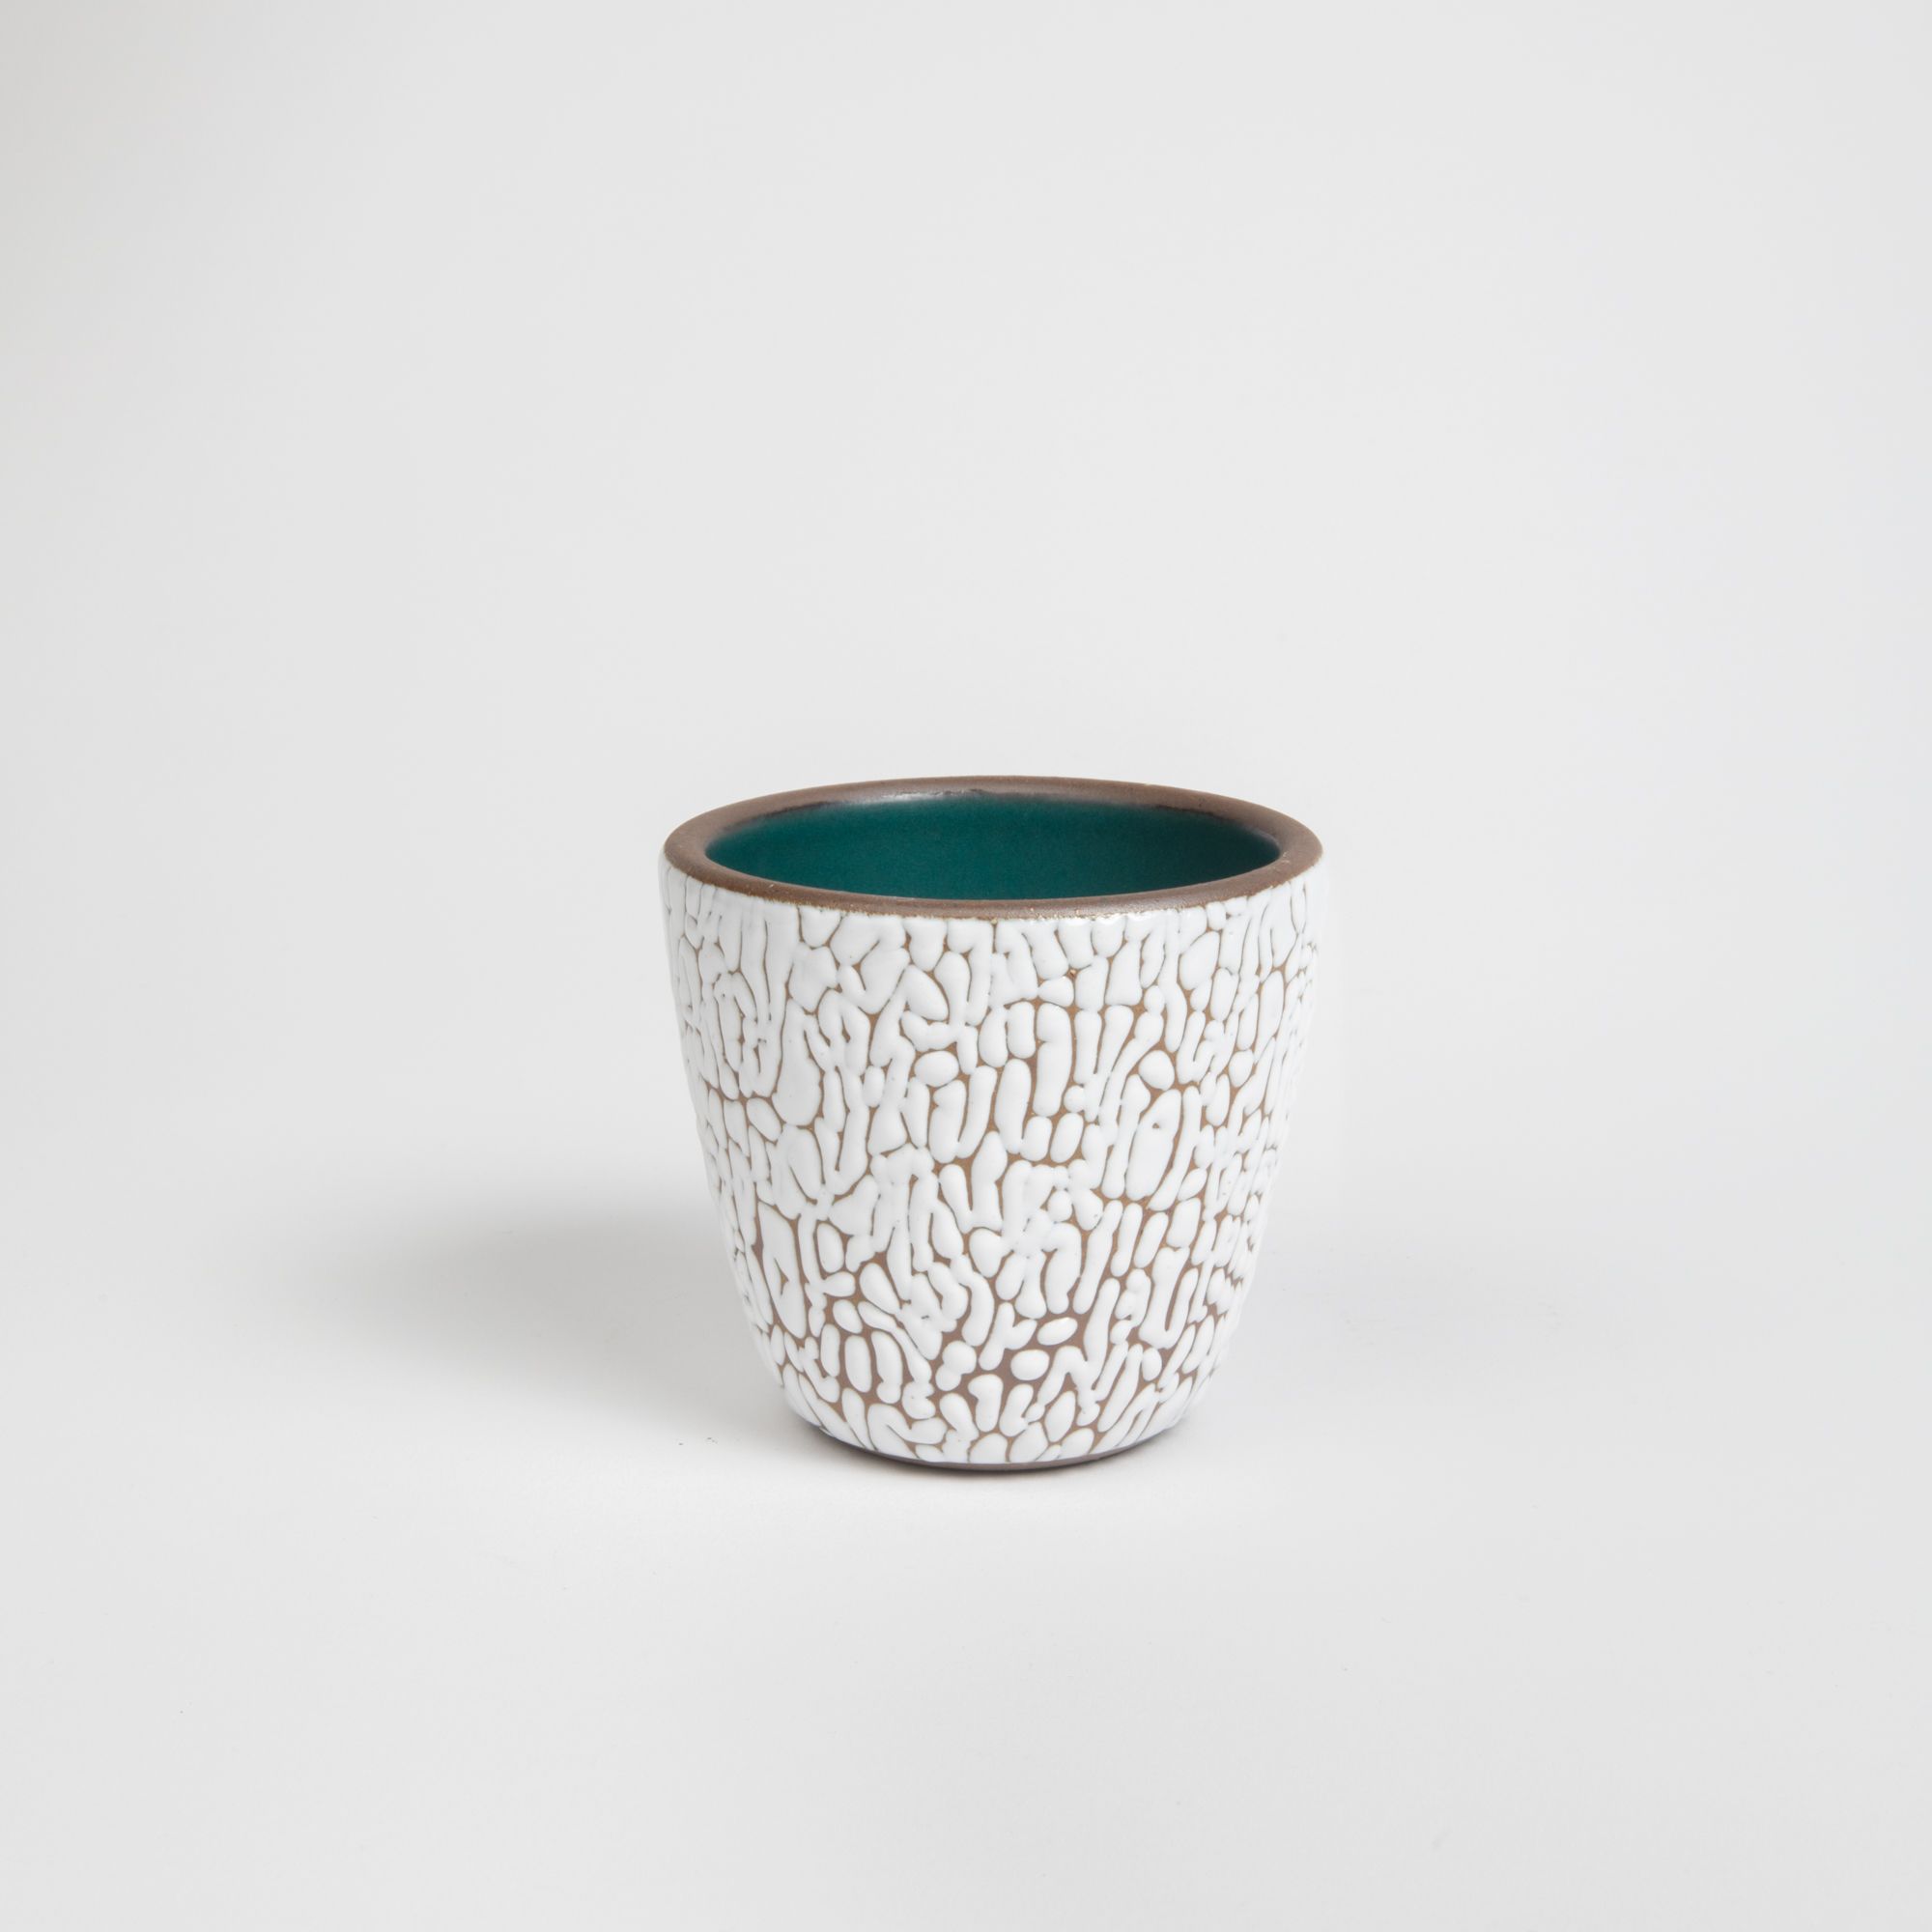 A small ceramic cup with cracked texture and the interior being dark teal.